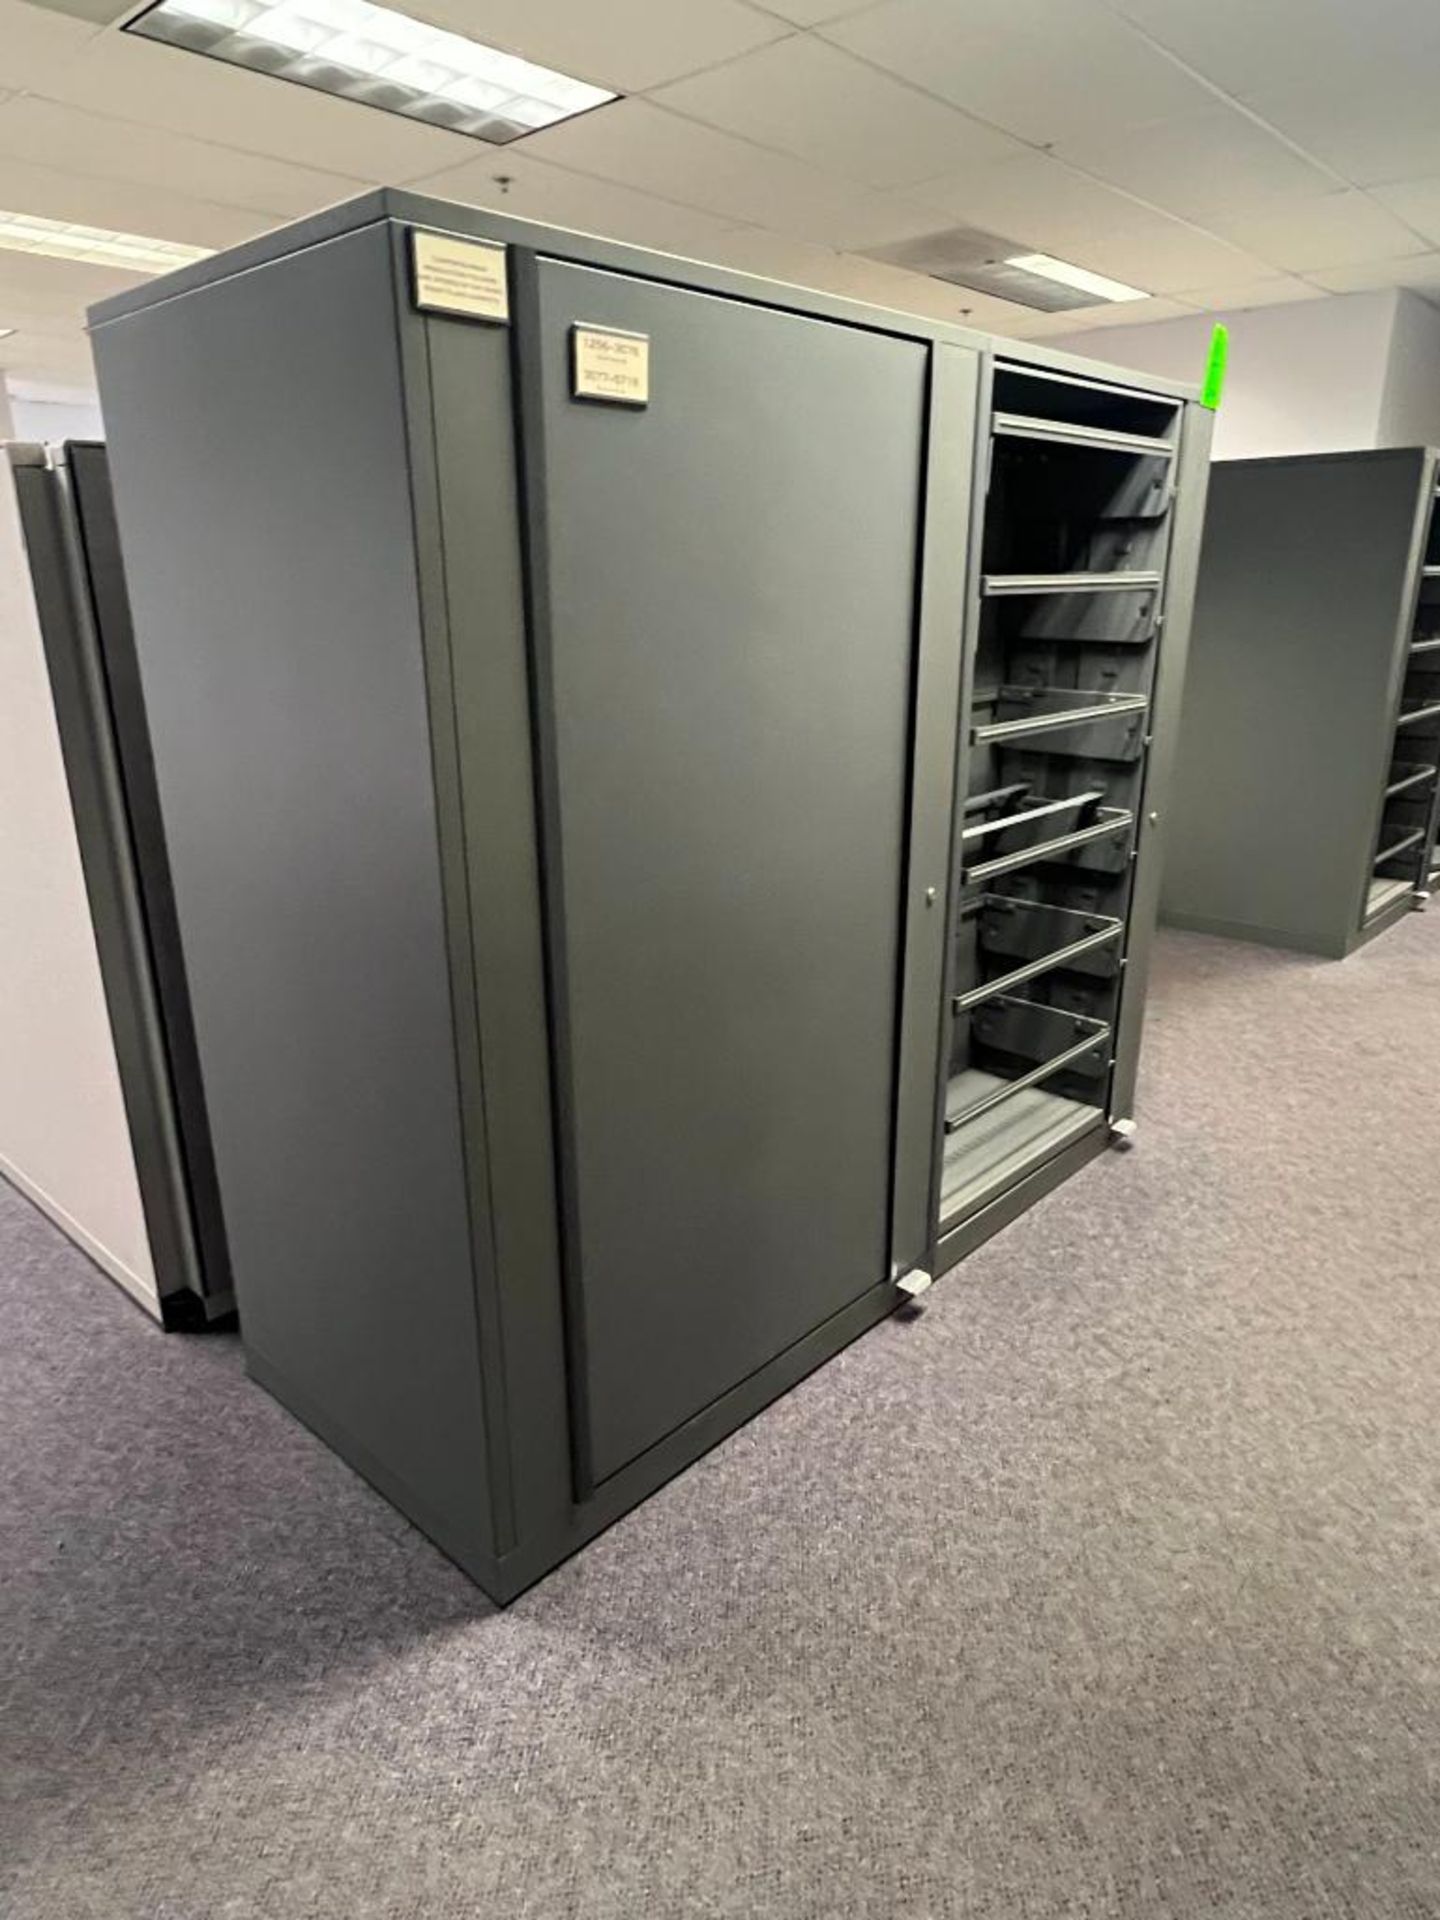 Lot of (2) Section of Rotating Filing Cabinets - Image 2 of 2